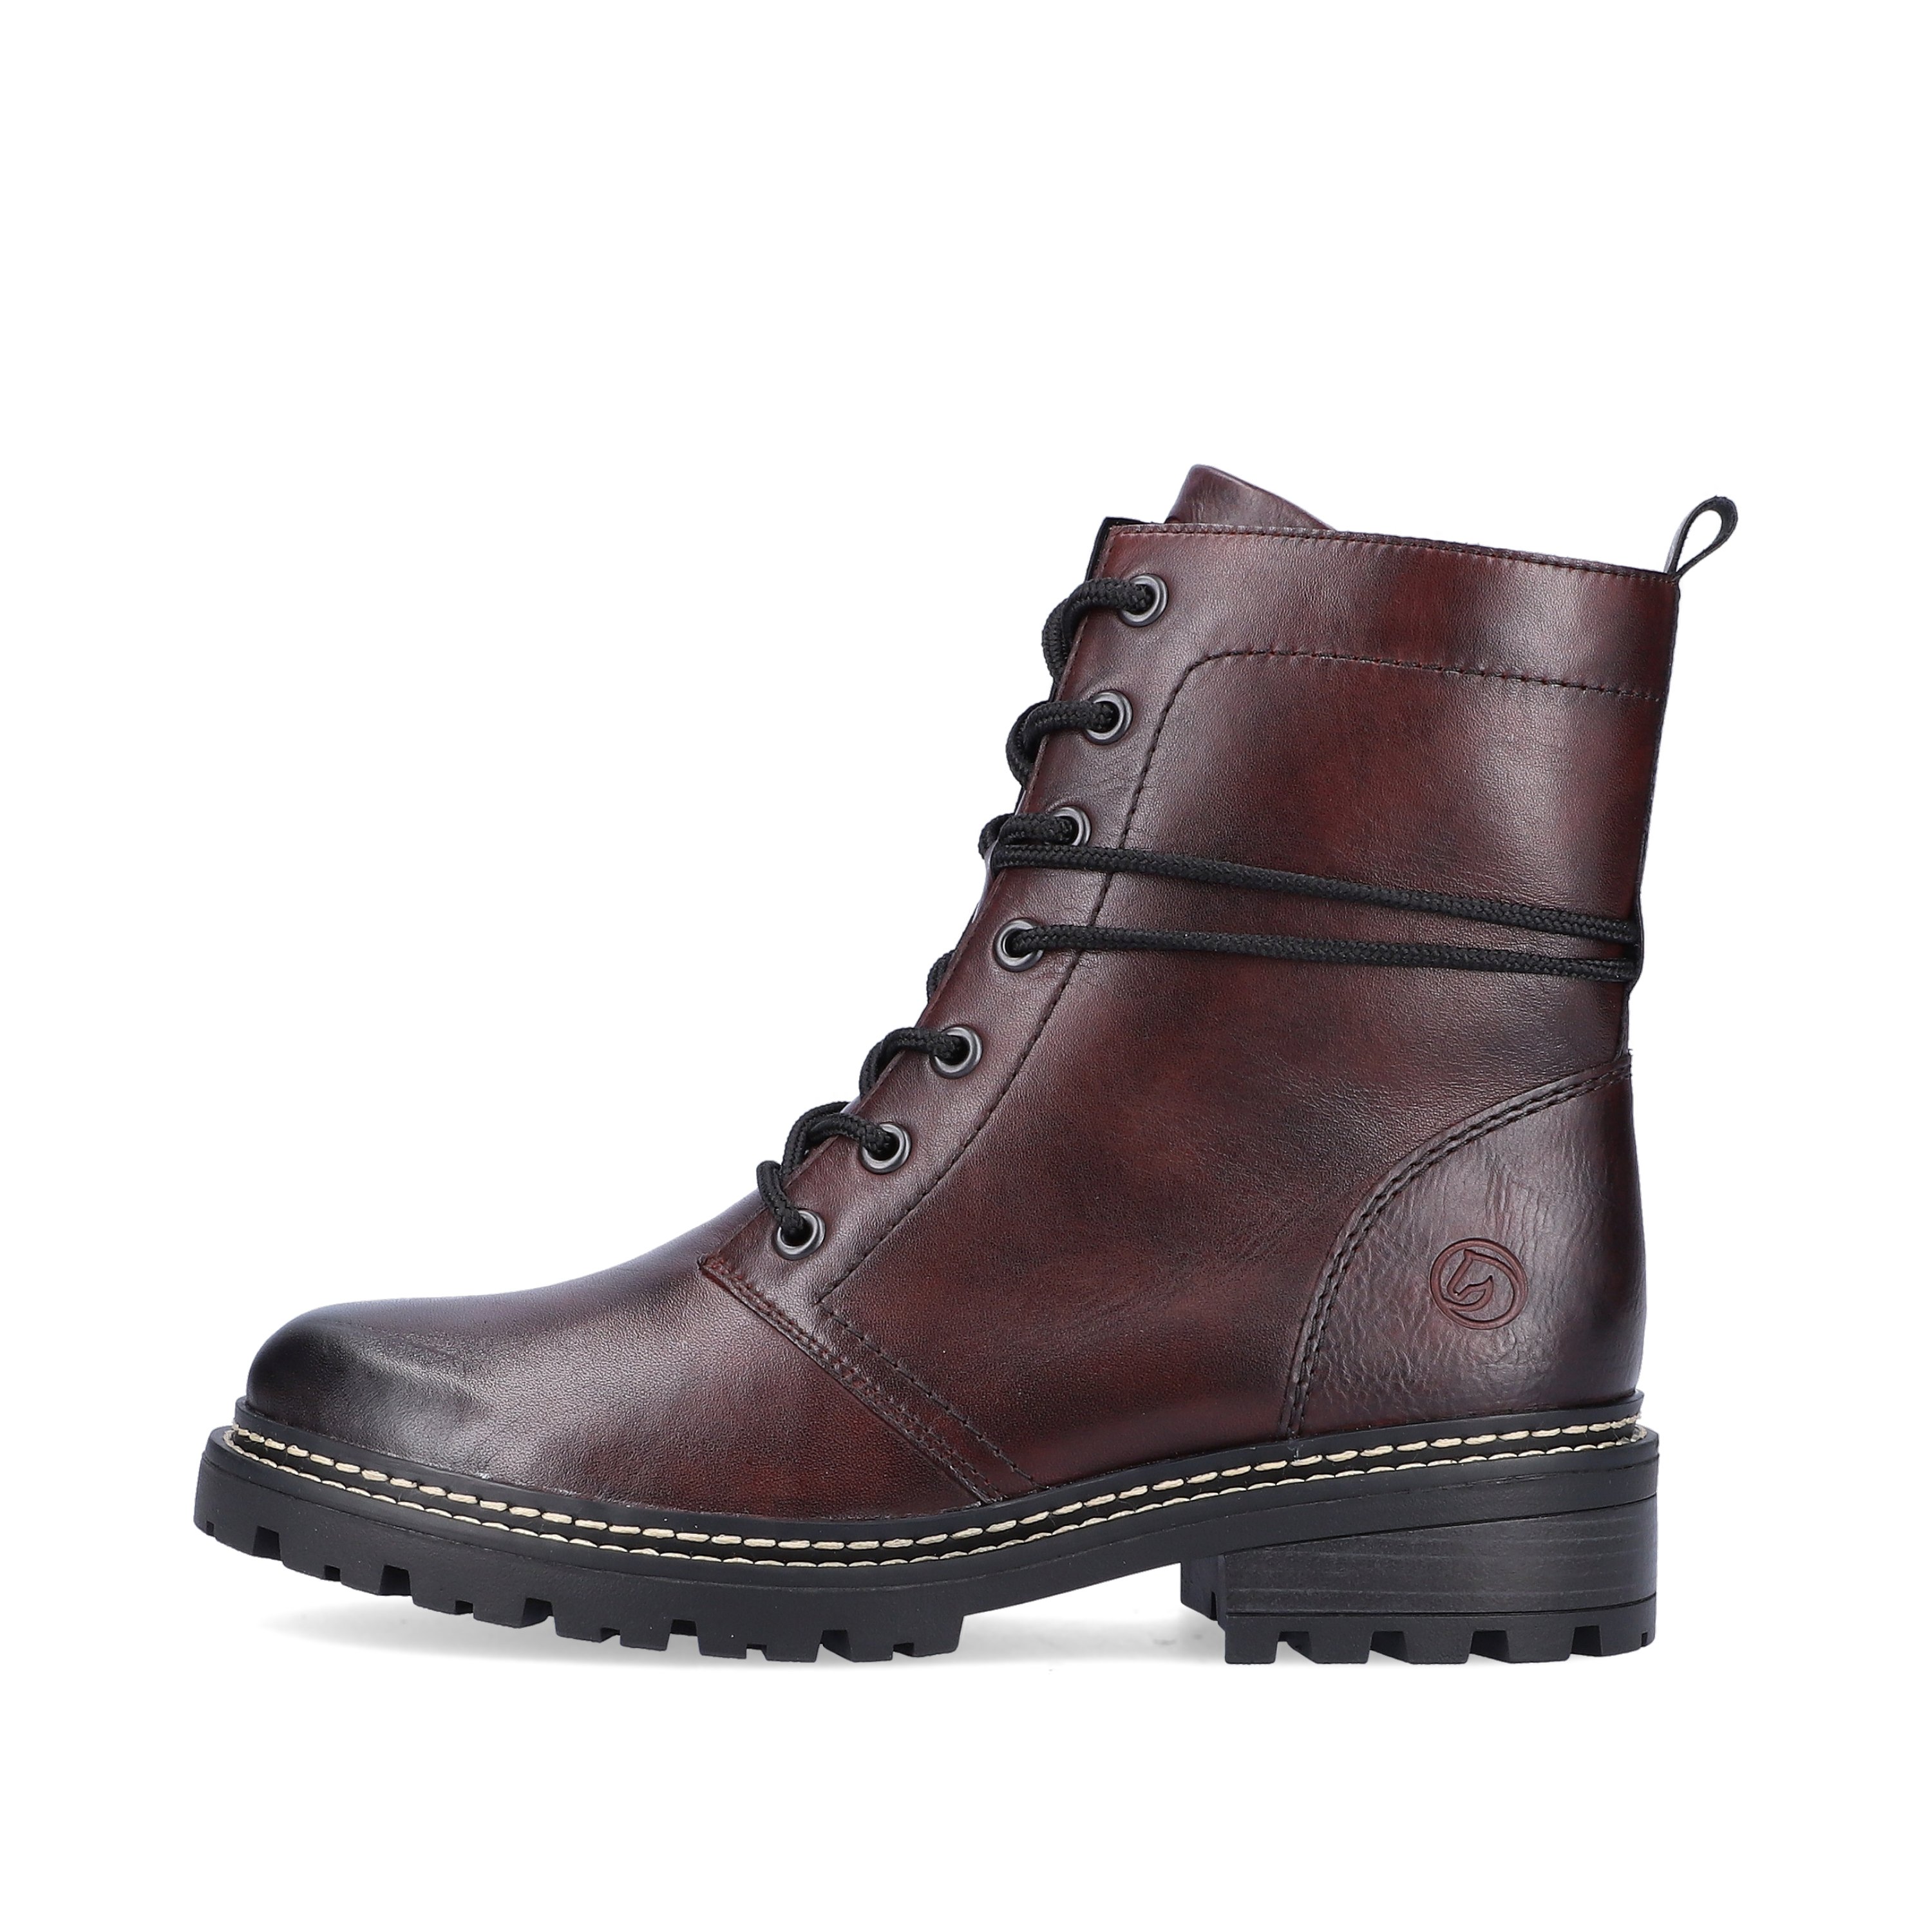 Wine red remonte women´s biker boots D0B75-35 with cushioning profile sole. The outside of the shoe